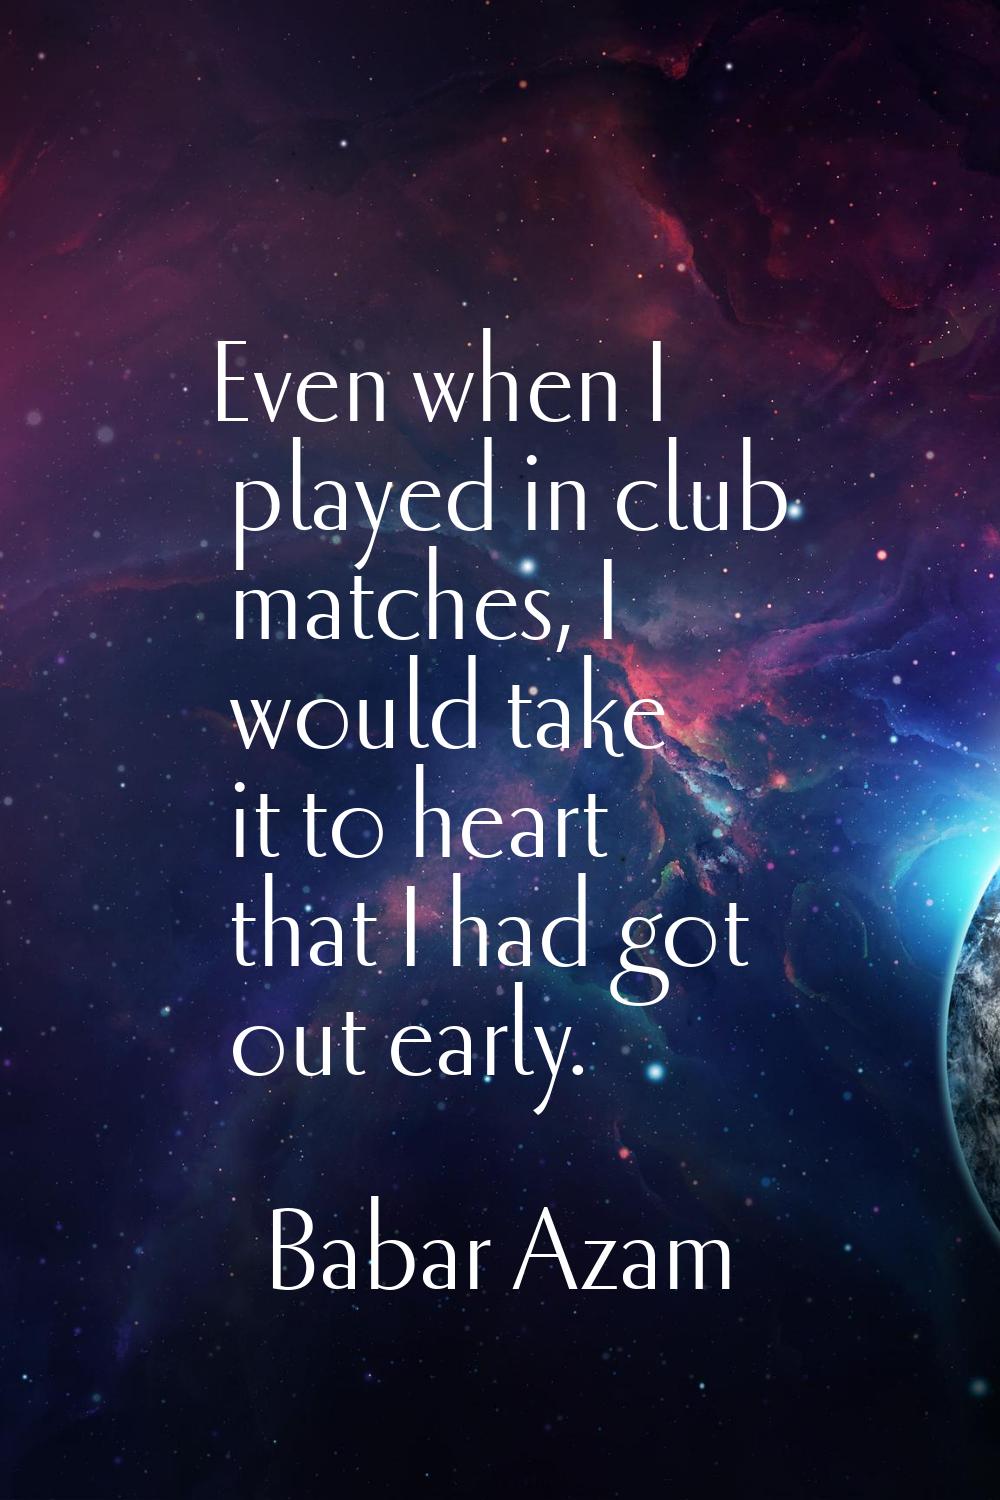 Even when I played in club matches, I would take it to heart that I had got out early.